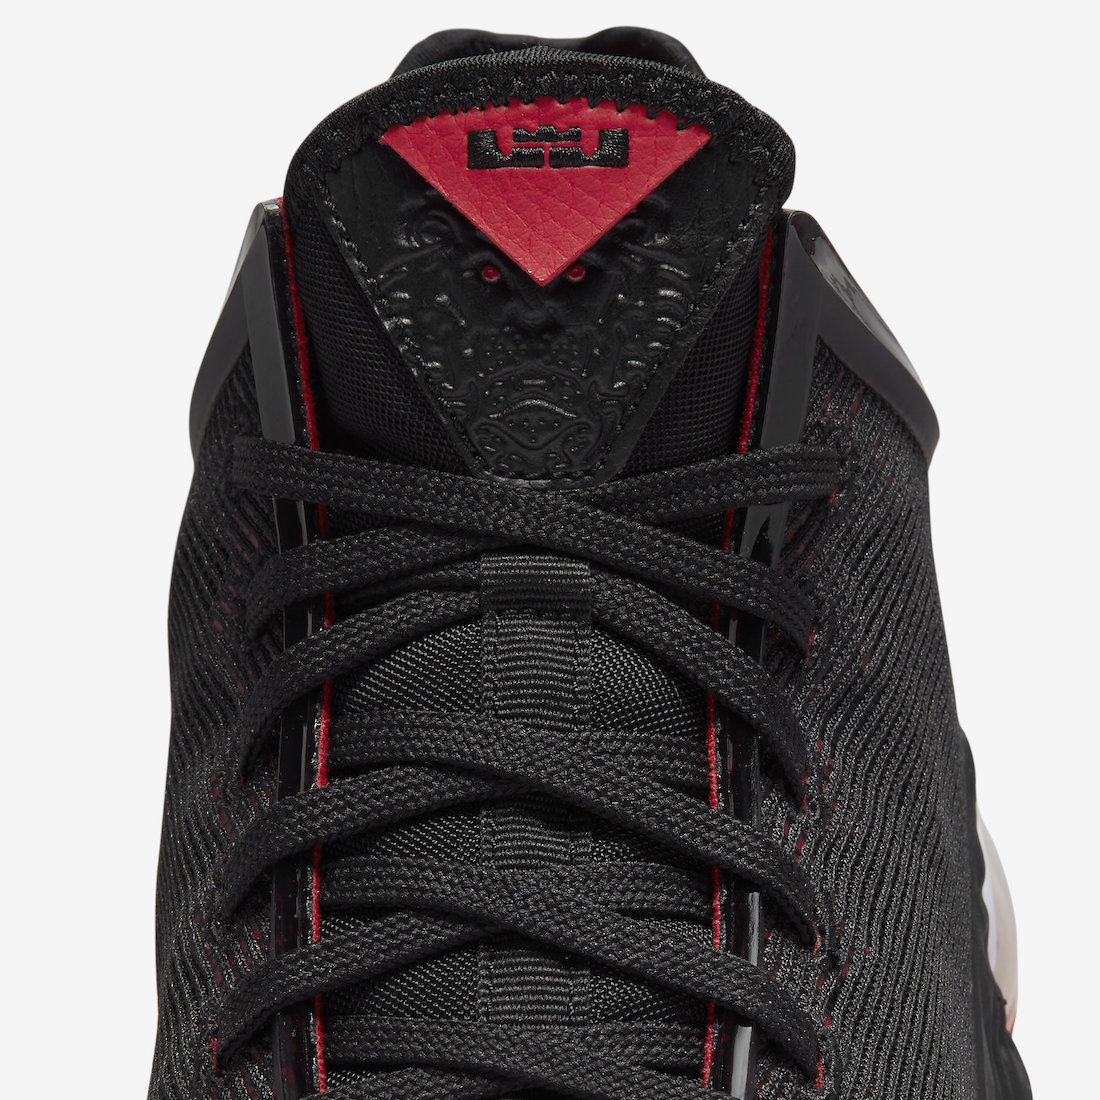 Nike-LeBron-19-Low-Bred-DH1270-001-Release-Date-8